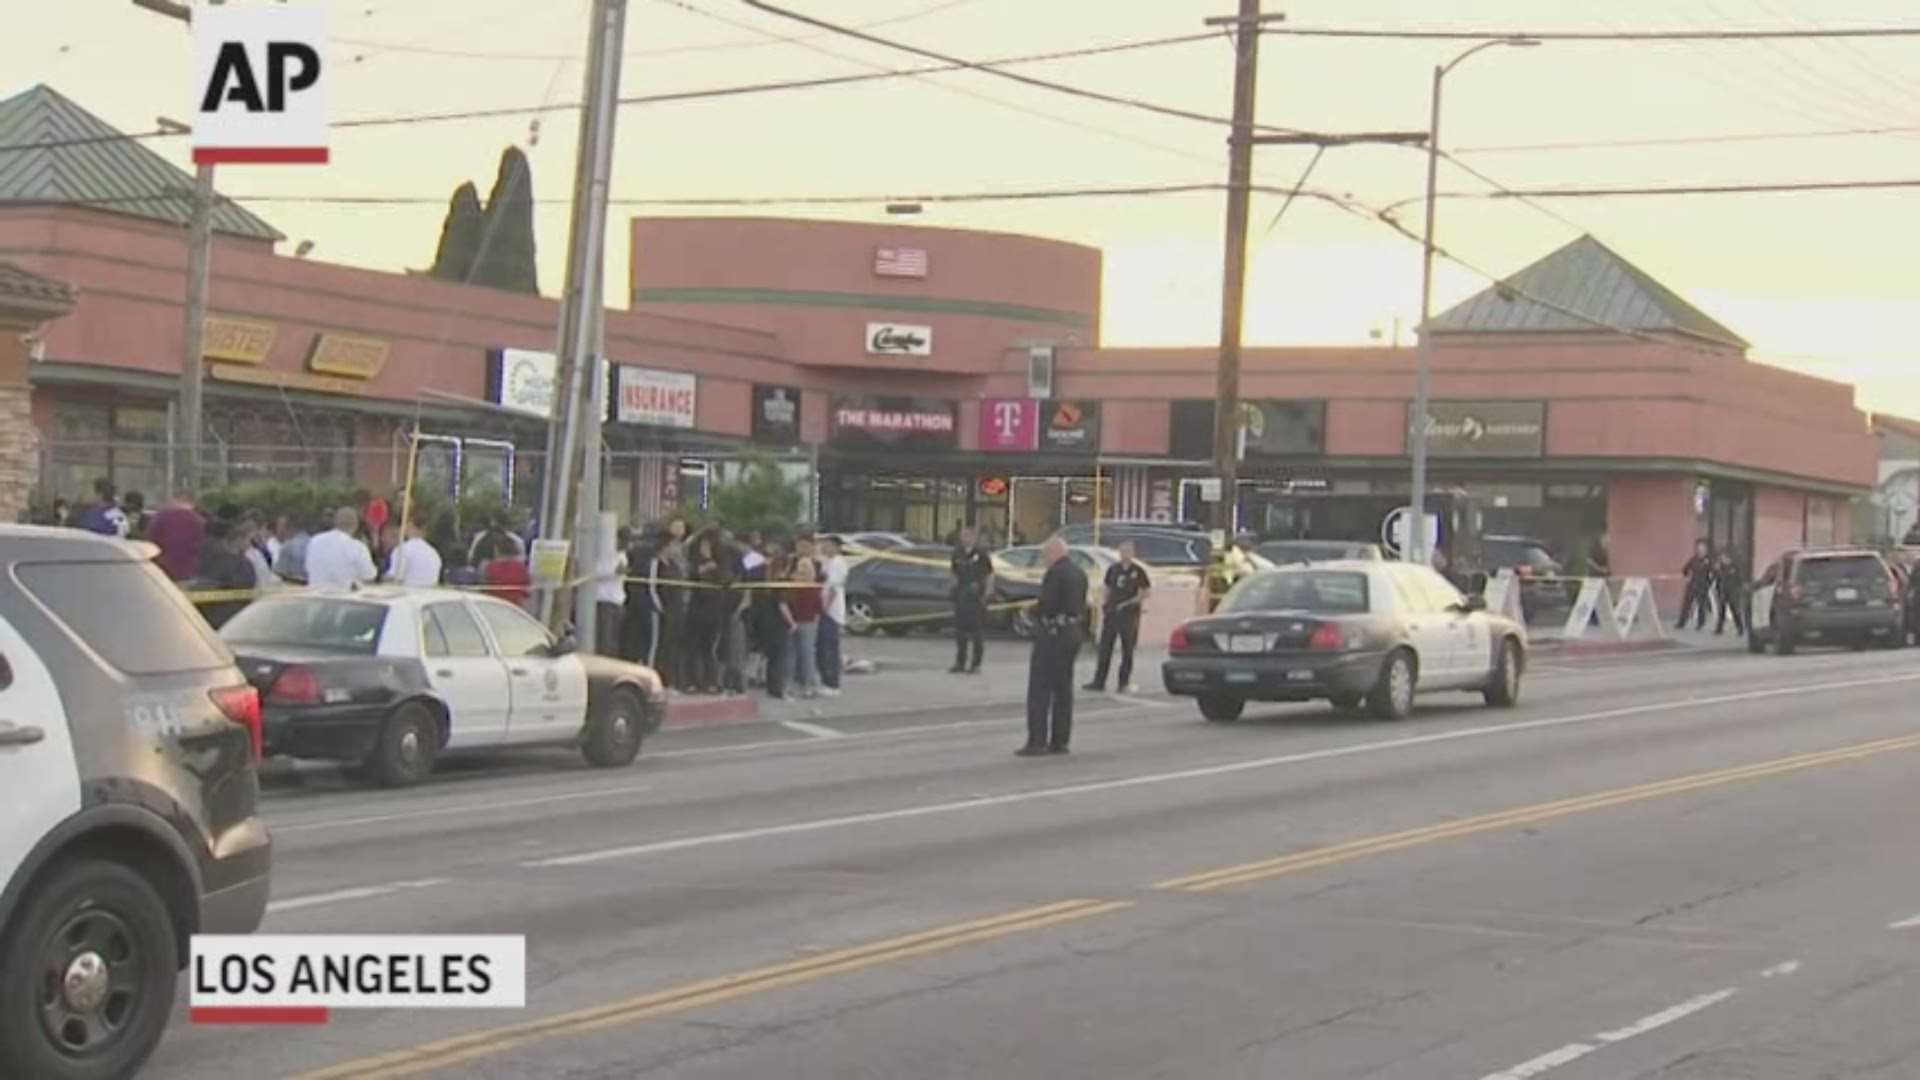 Nipsey Hussle, the Grammy-nominated rapper who was heavily respected in South Los Angeles where he grew up, was shot and killed outside a clothing store that he owned, authorities said. (AP)